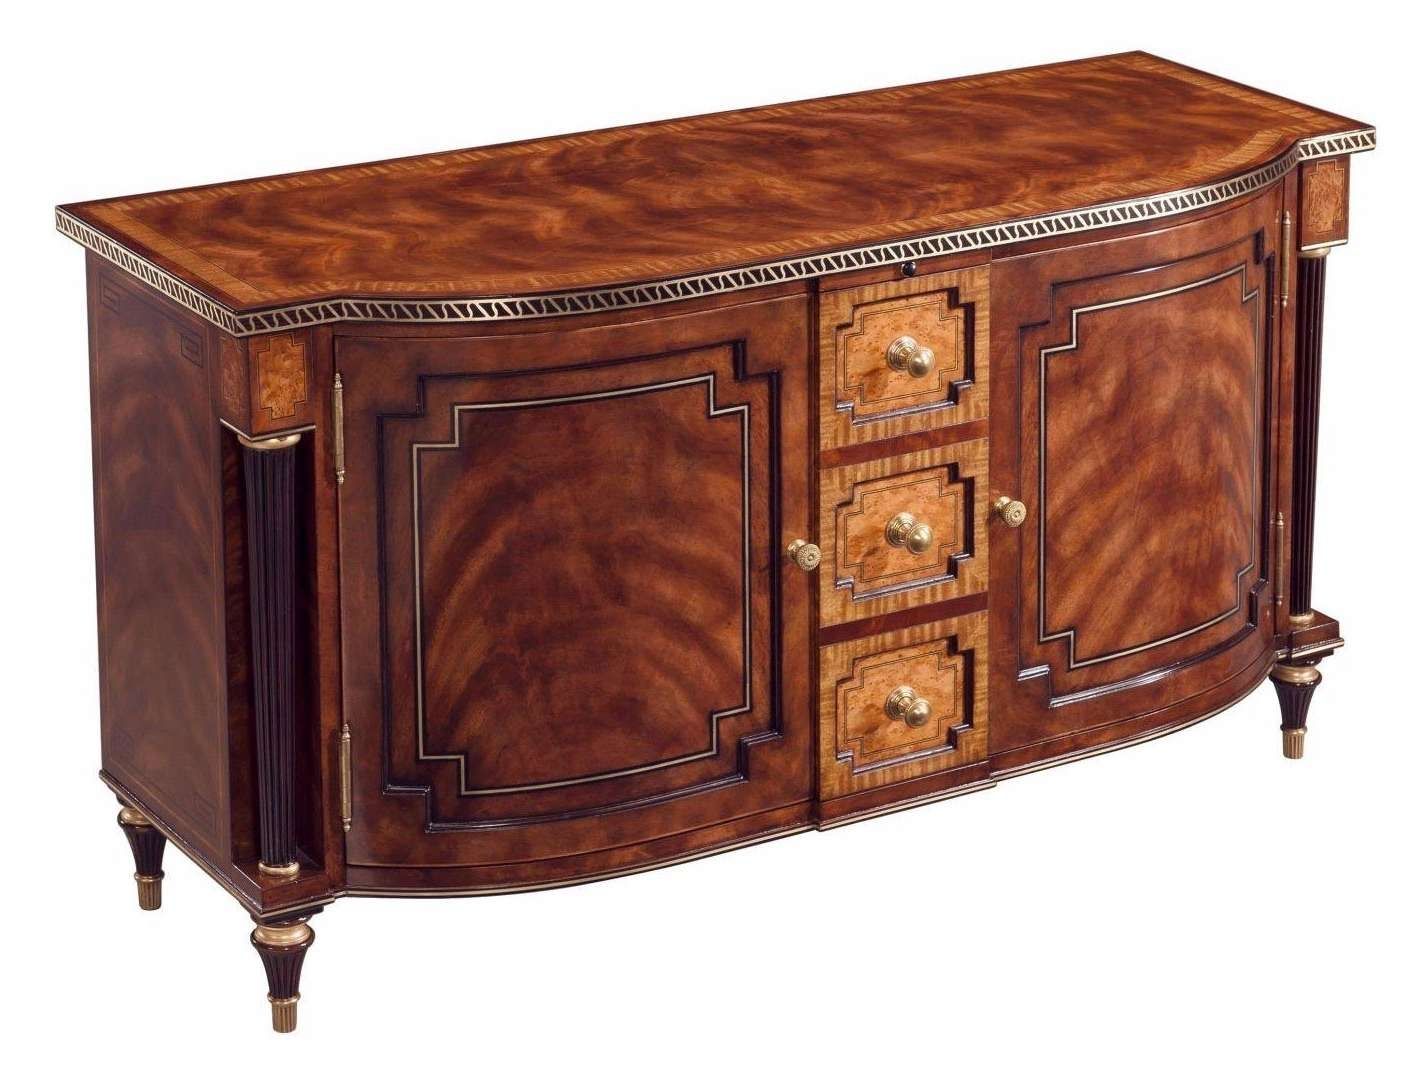 A Mahogany Veneered And Yew Burl Banded Tv Cabinet, Tv Stands From For Mahogany Tv Cabinets (View 18 of 20)